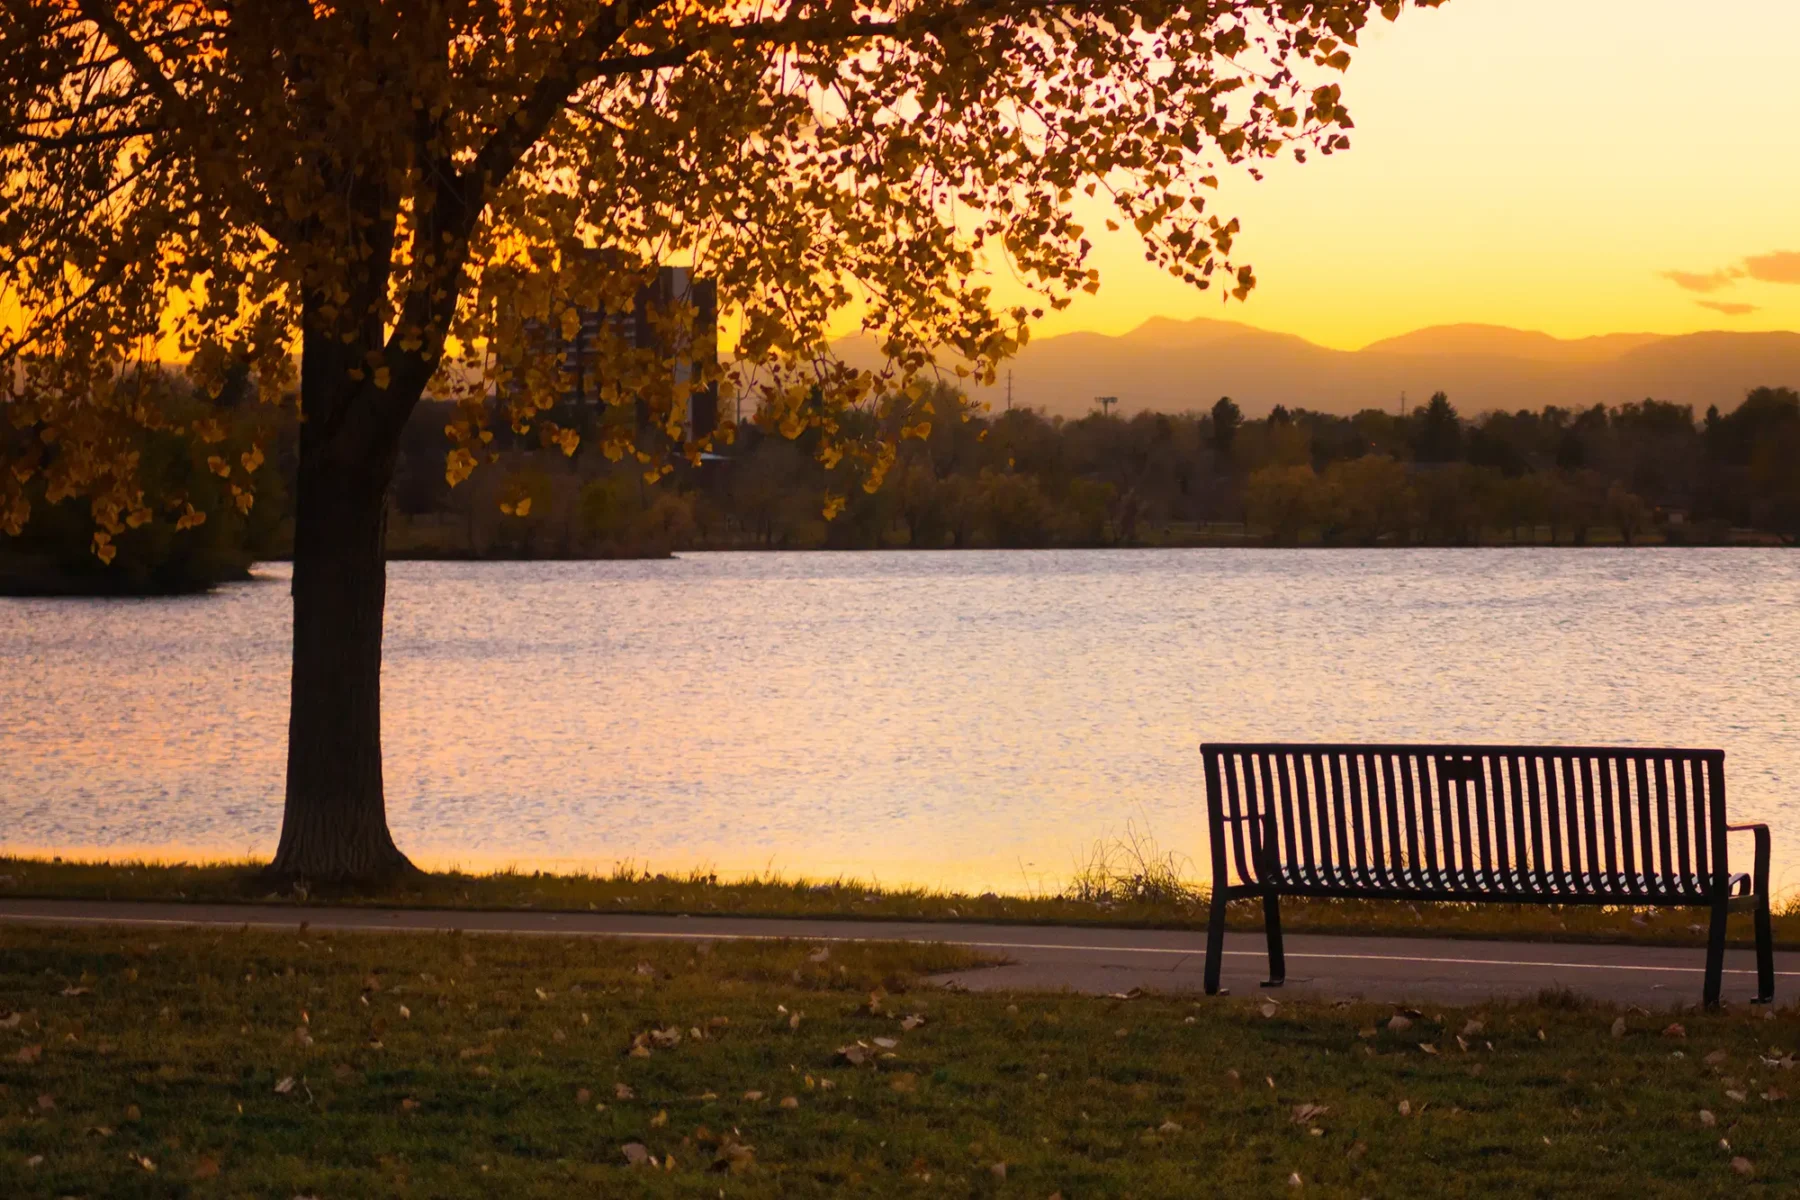 Park bench overlooking water at dusk